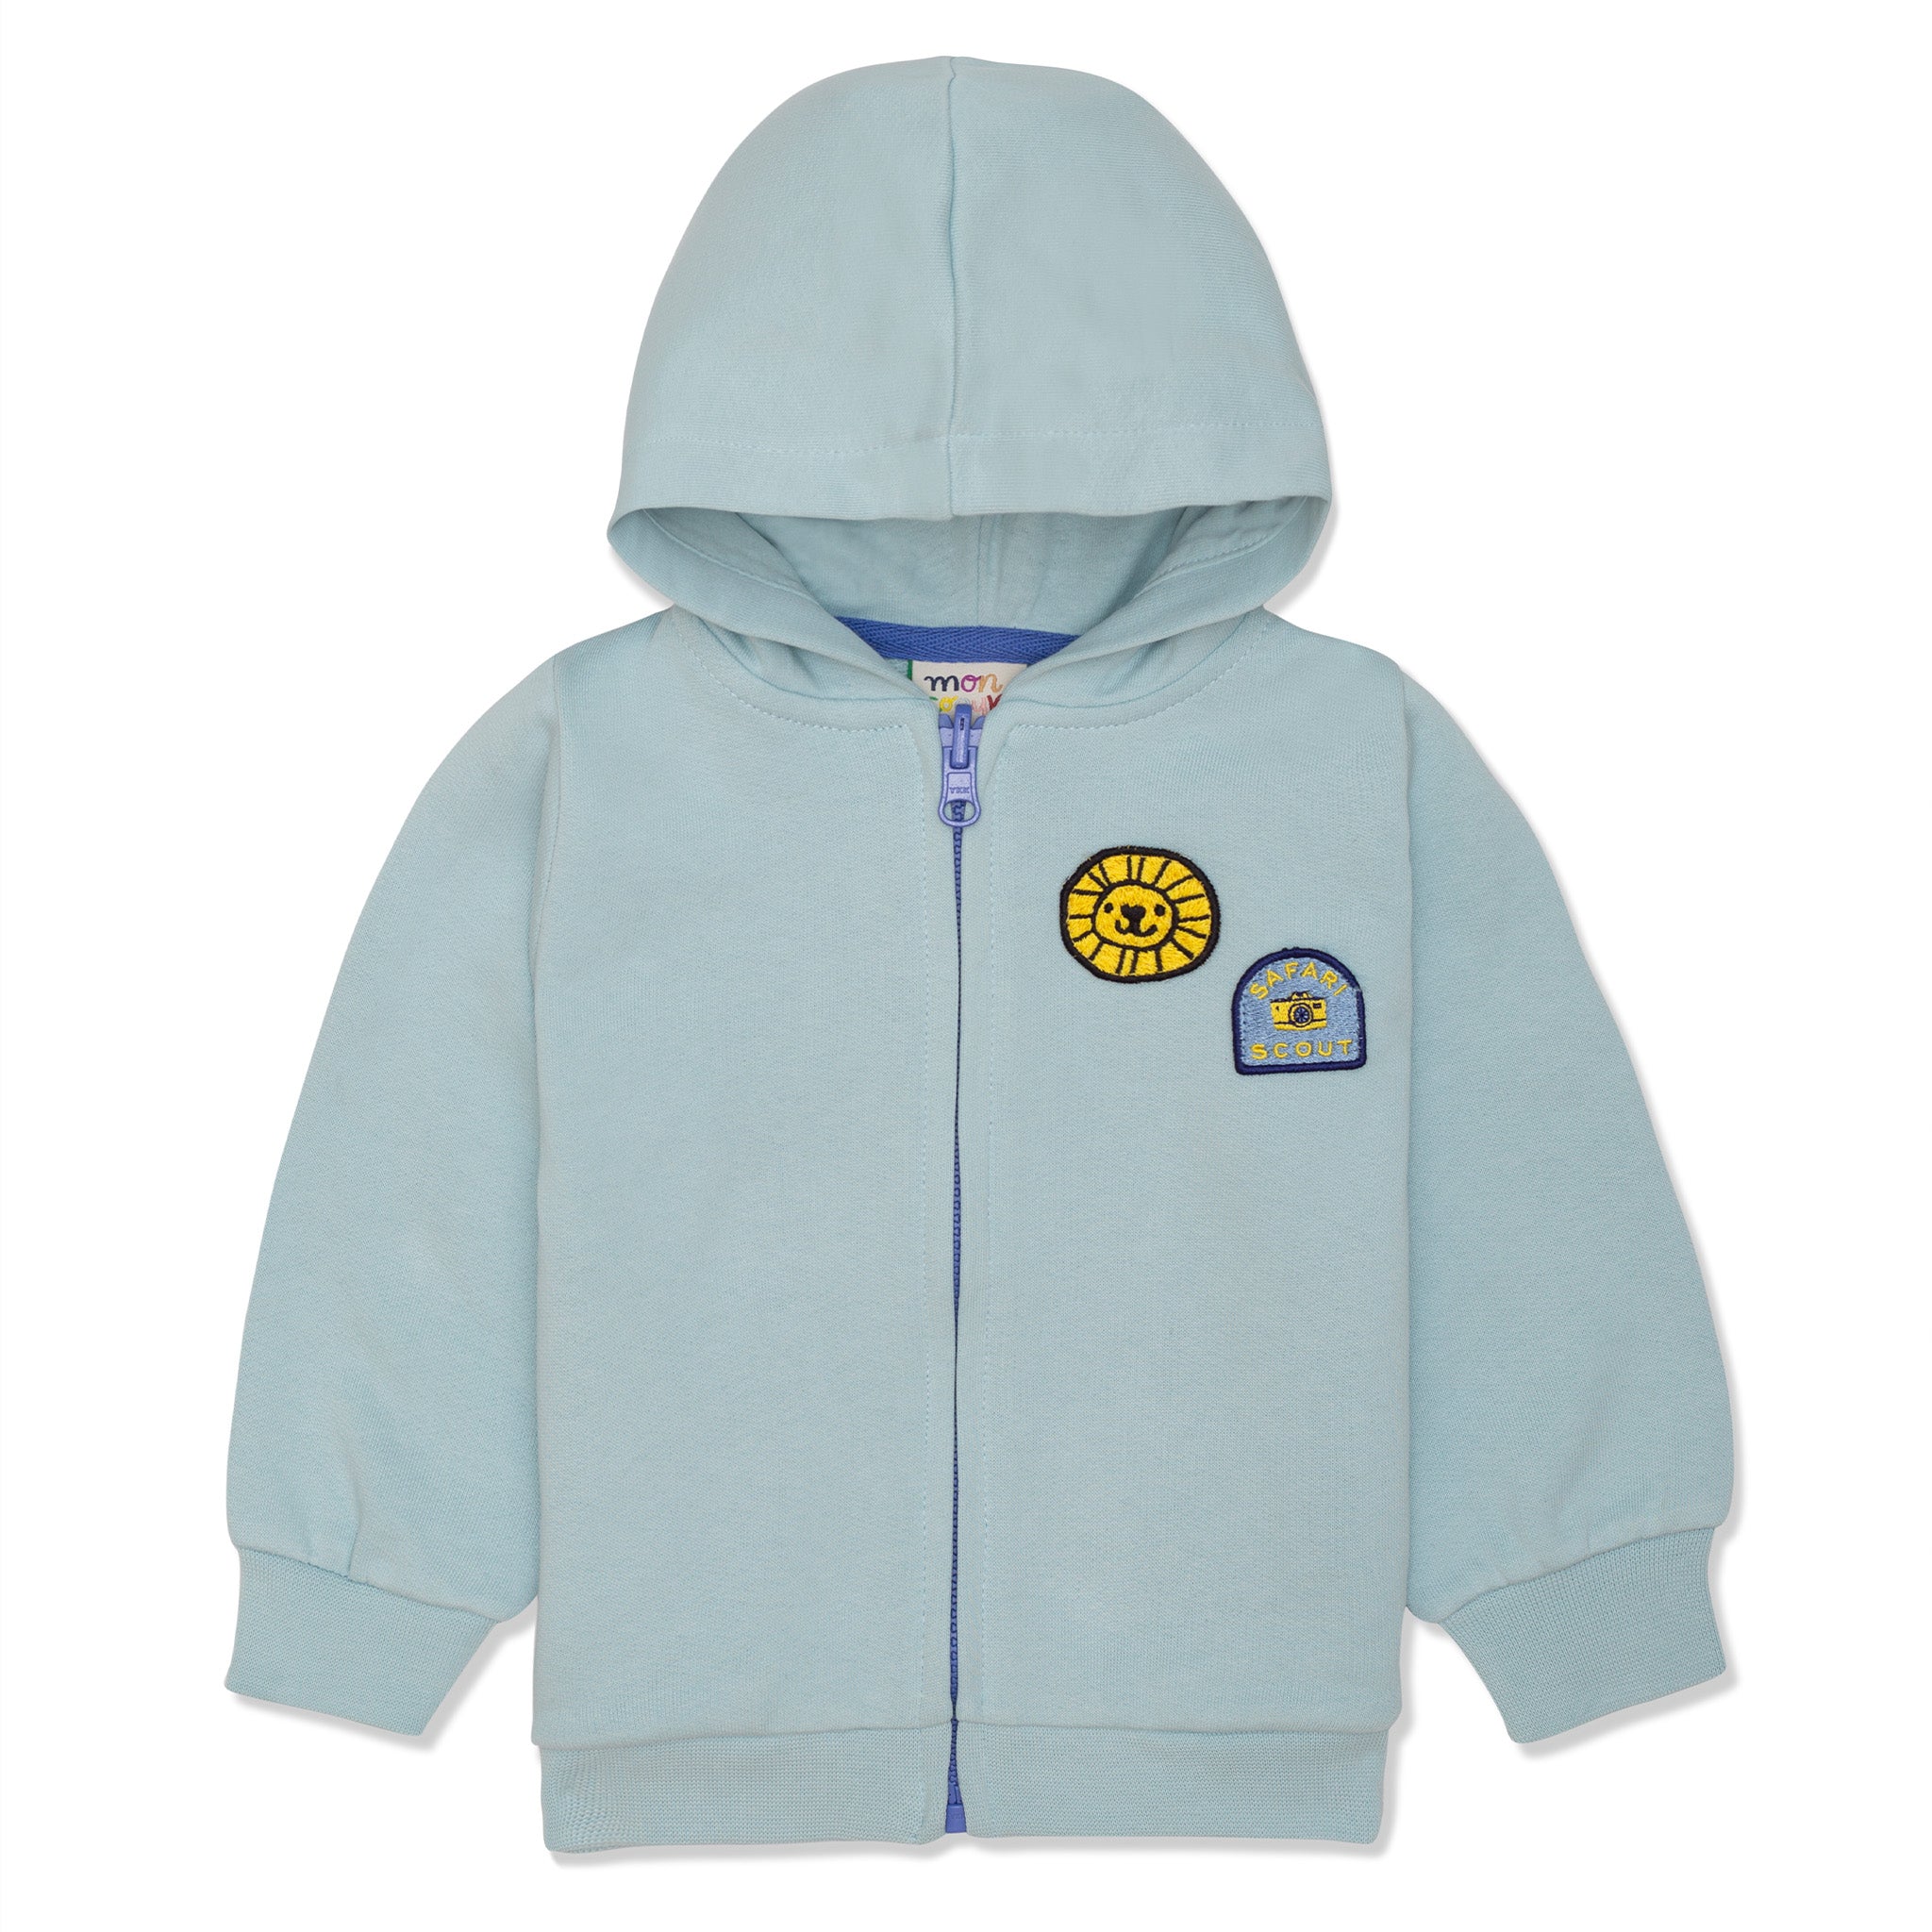 Recycled Cotton Patches Kid Zipper Hoodie